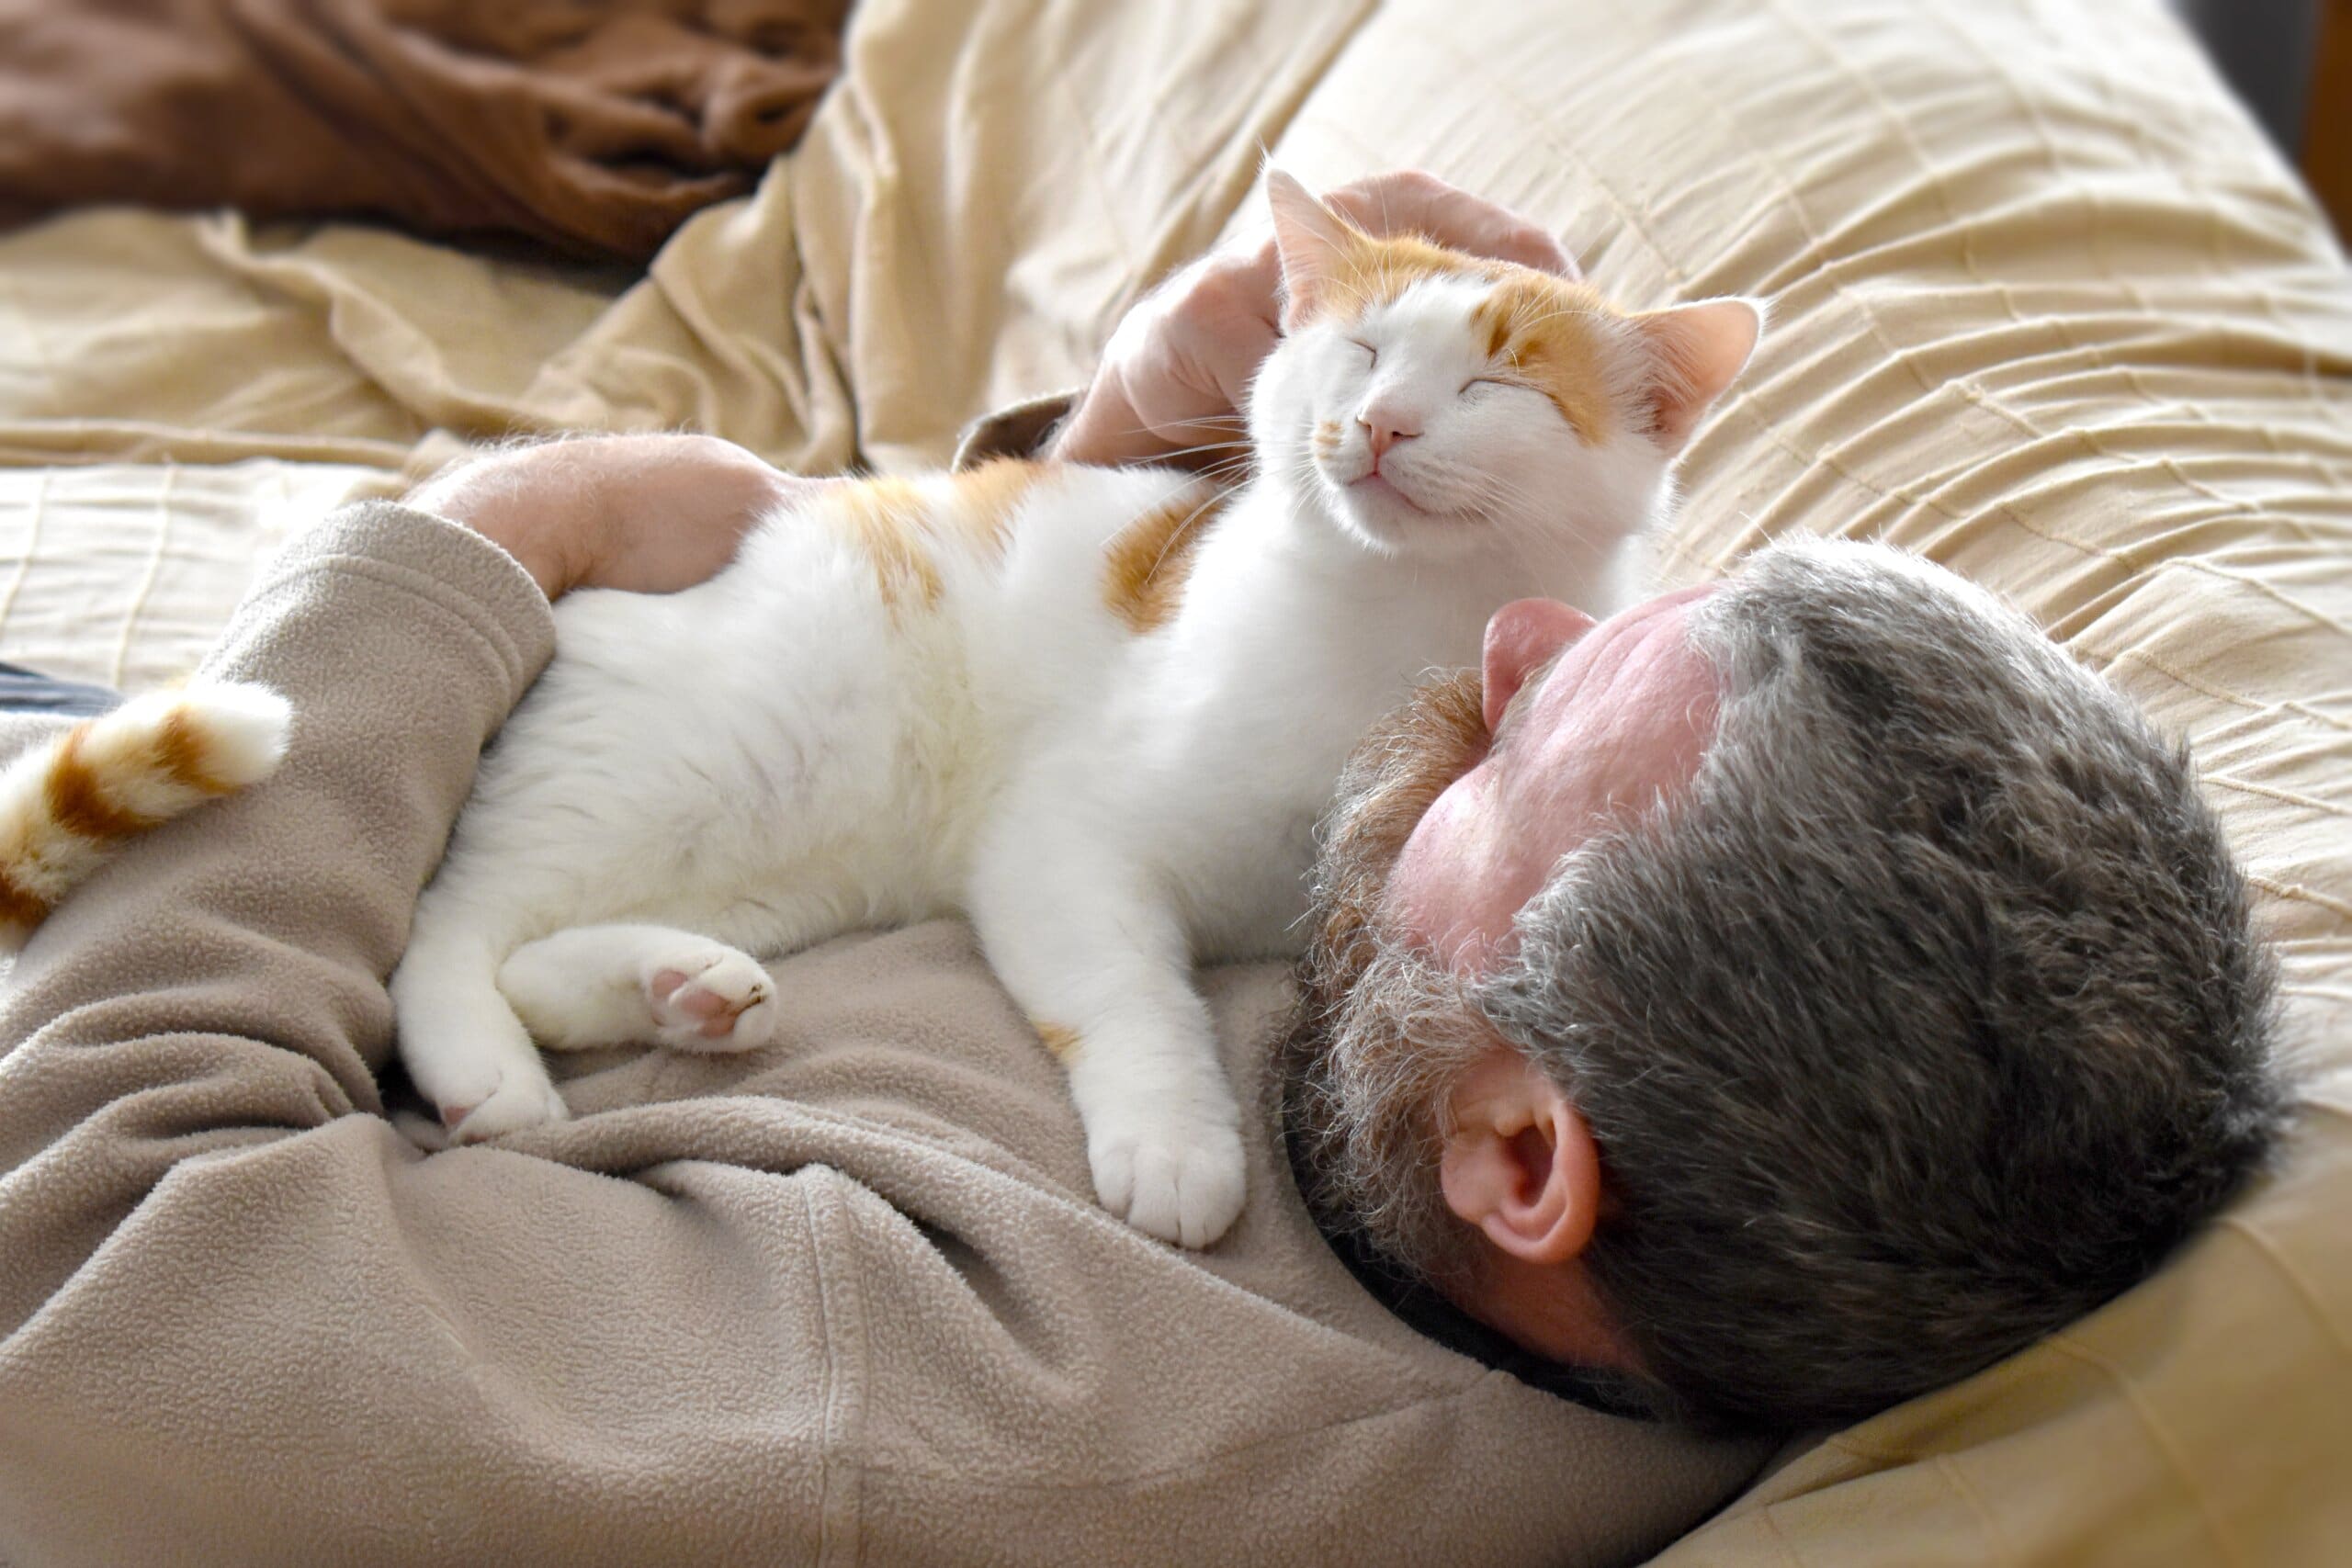 Cat sleeping in bed with owner on man's chest.